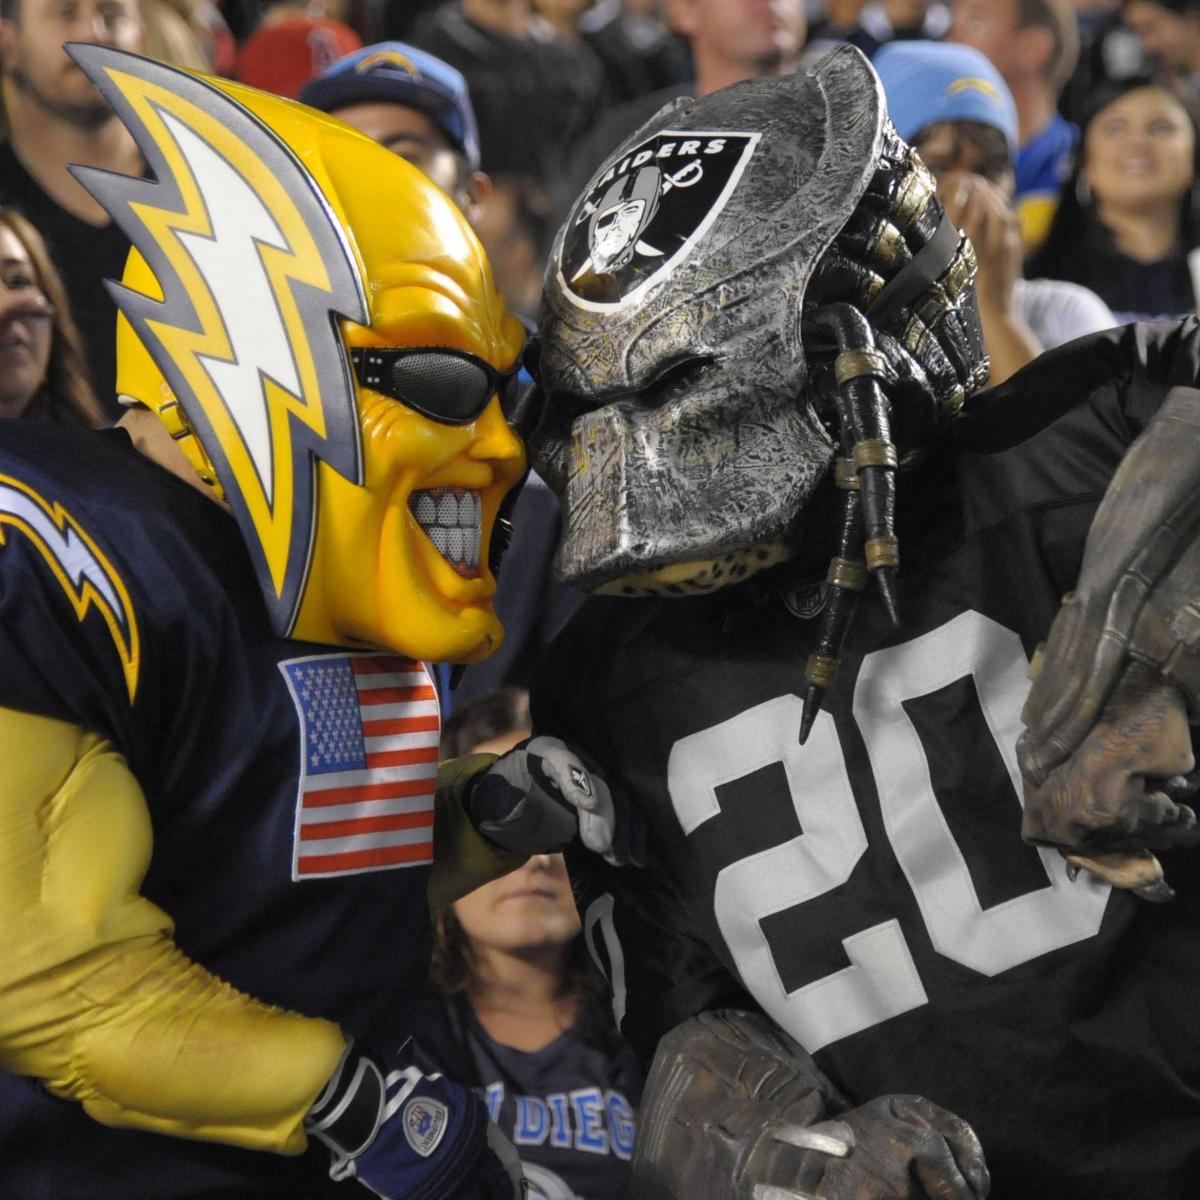 Chargers and Raiders fans fighting over the game.